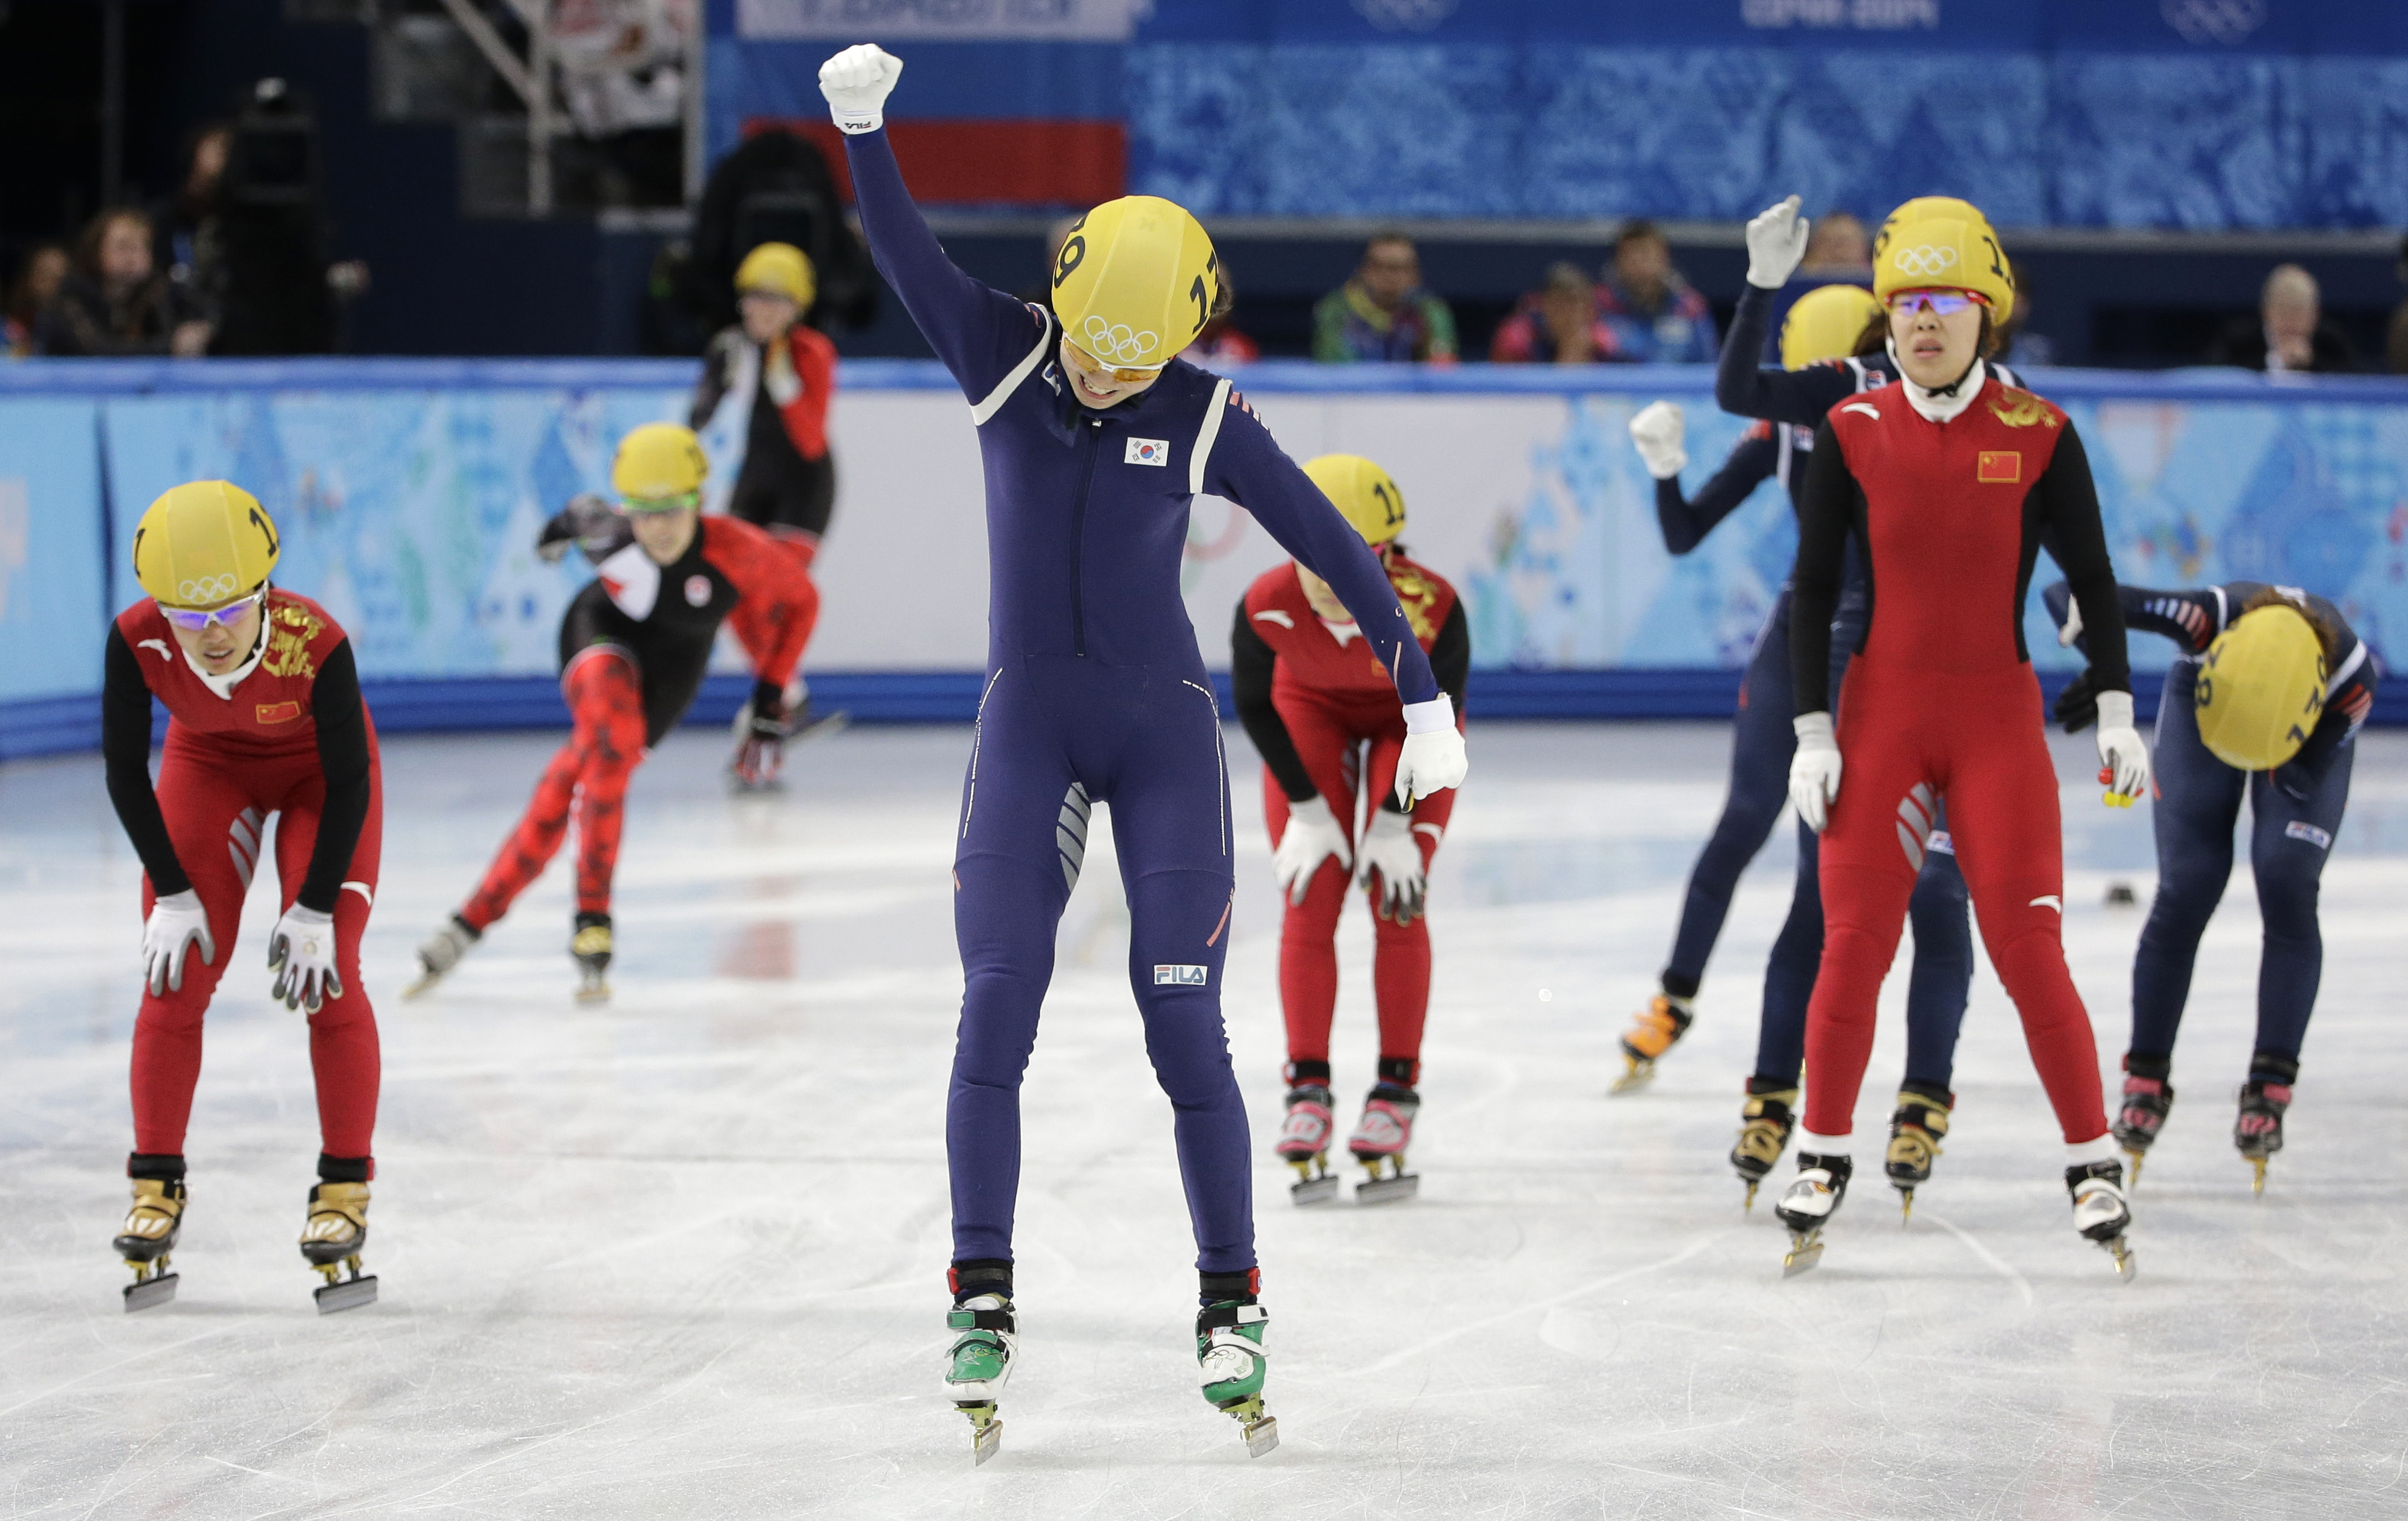 Shim Suk-Hee of South Korea, centre, celebrates her team's first place in the women's 3000m short track speedskating relay final at the Iceberg Skating Palace during the 2014 Winter Olympics, Tuesday, Feb. 18, 2014, in Sochi, Russia. (AP Photo/David J. Phillip )